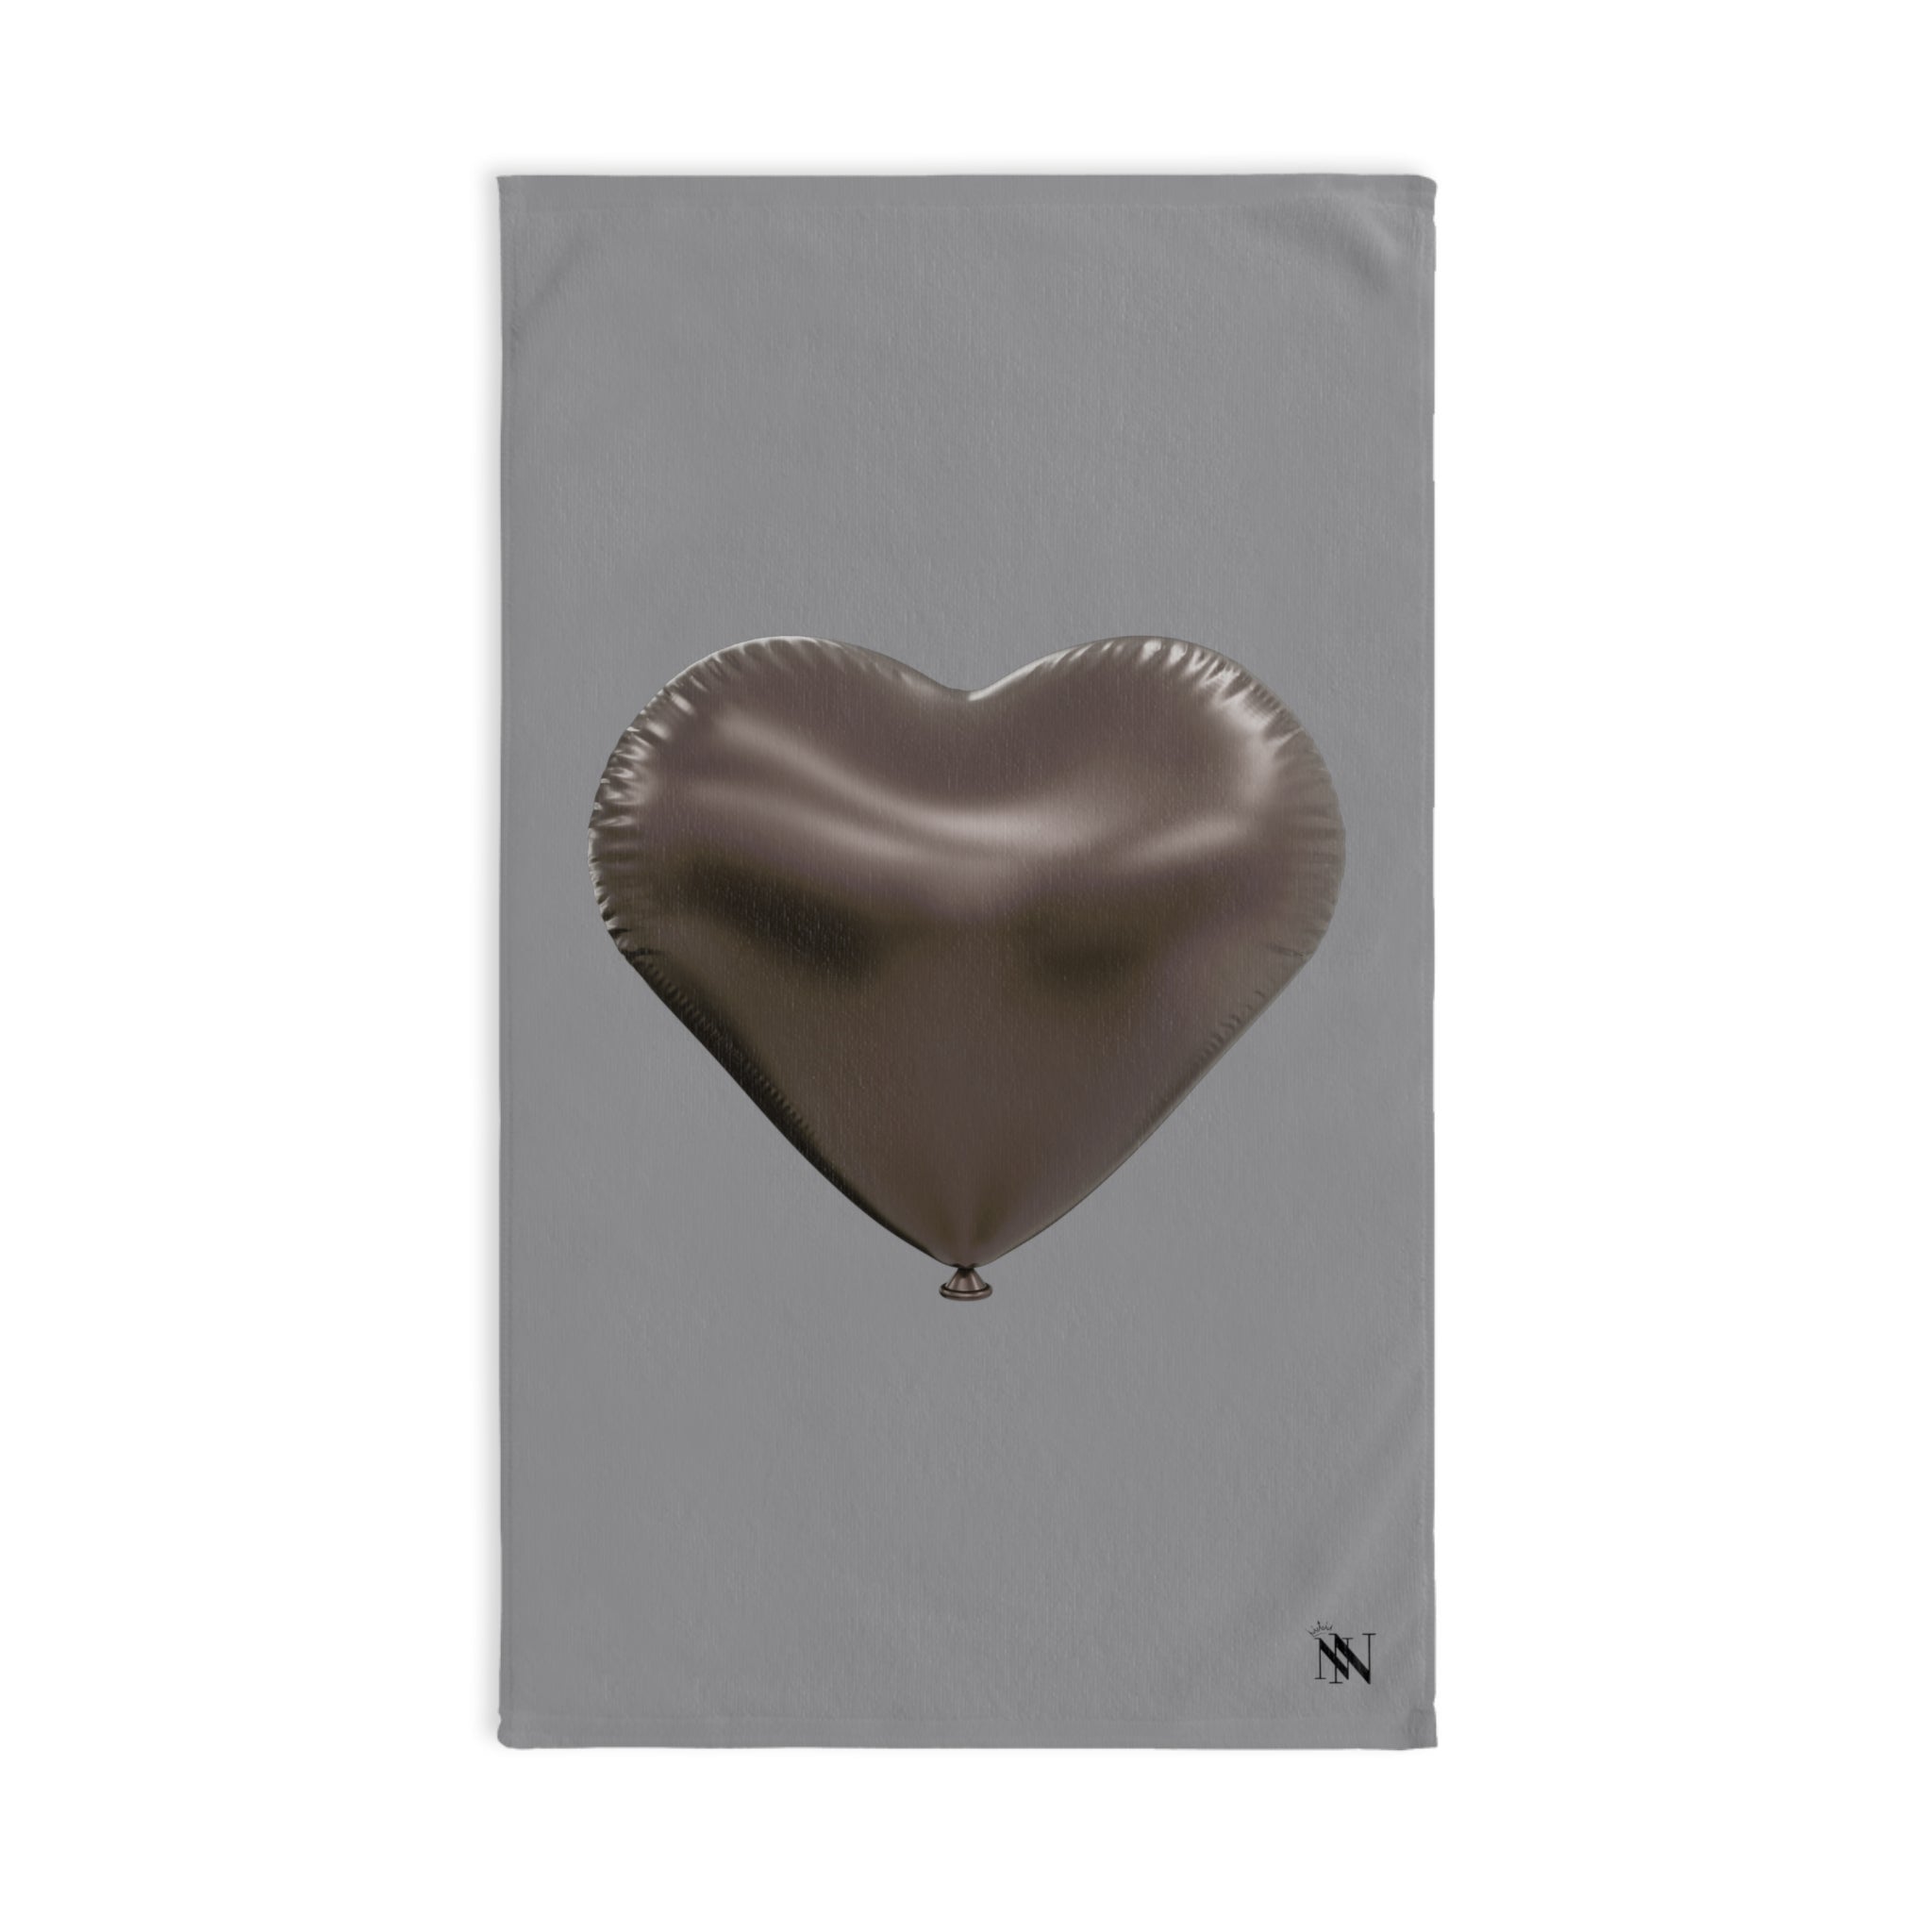 Heart Grey 3D Grey | Anniversary Wedding, Christmas, Valentines Day, Birthday Gifts for Him, Her, Romantic Gifts for Wife, Girlfriend, Couples Gifts for Boyfriend, Husband NECTAR NAPKINS